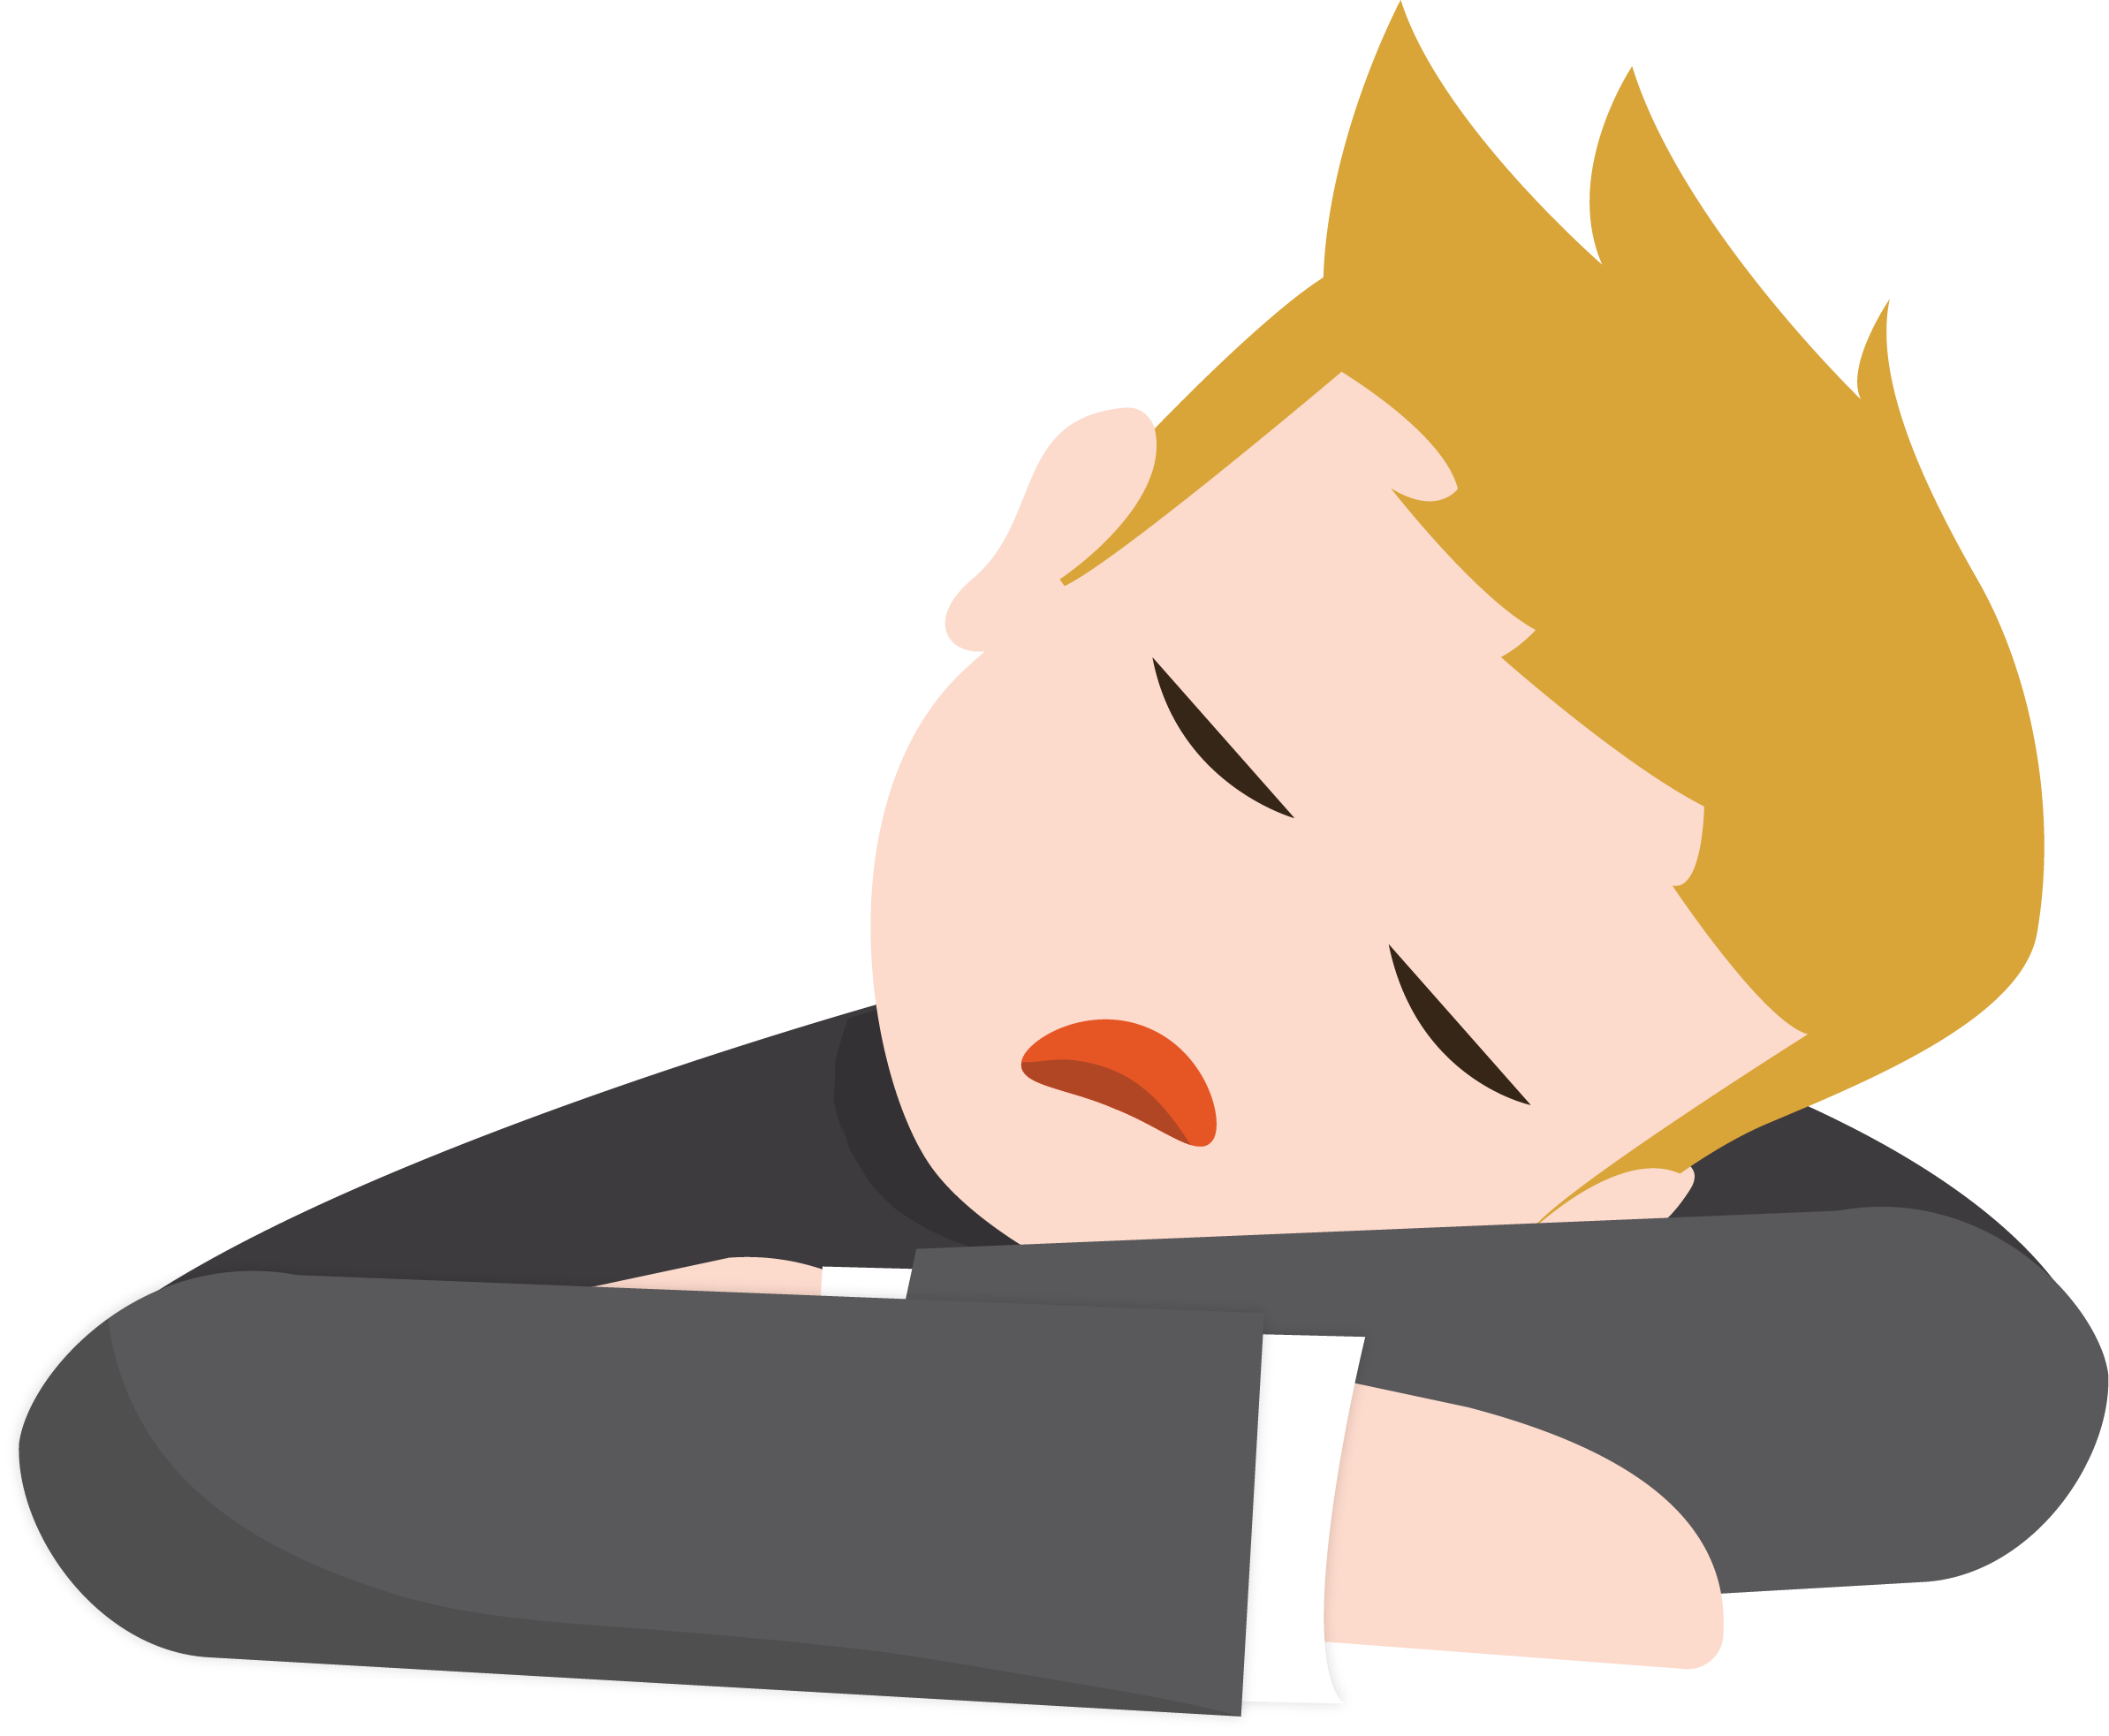 Does your company brand look tired?